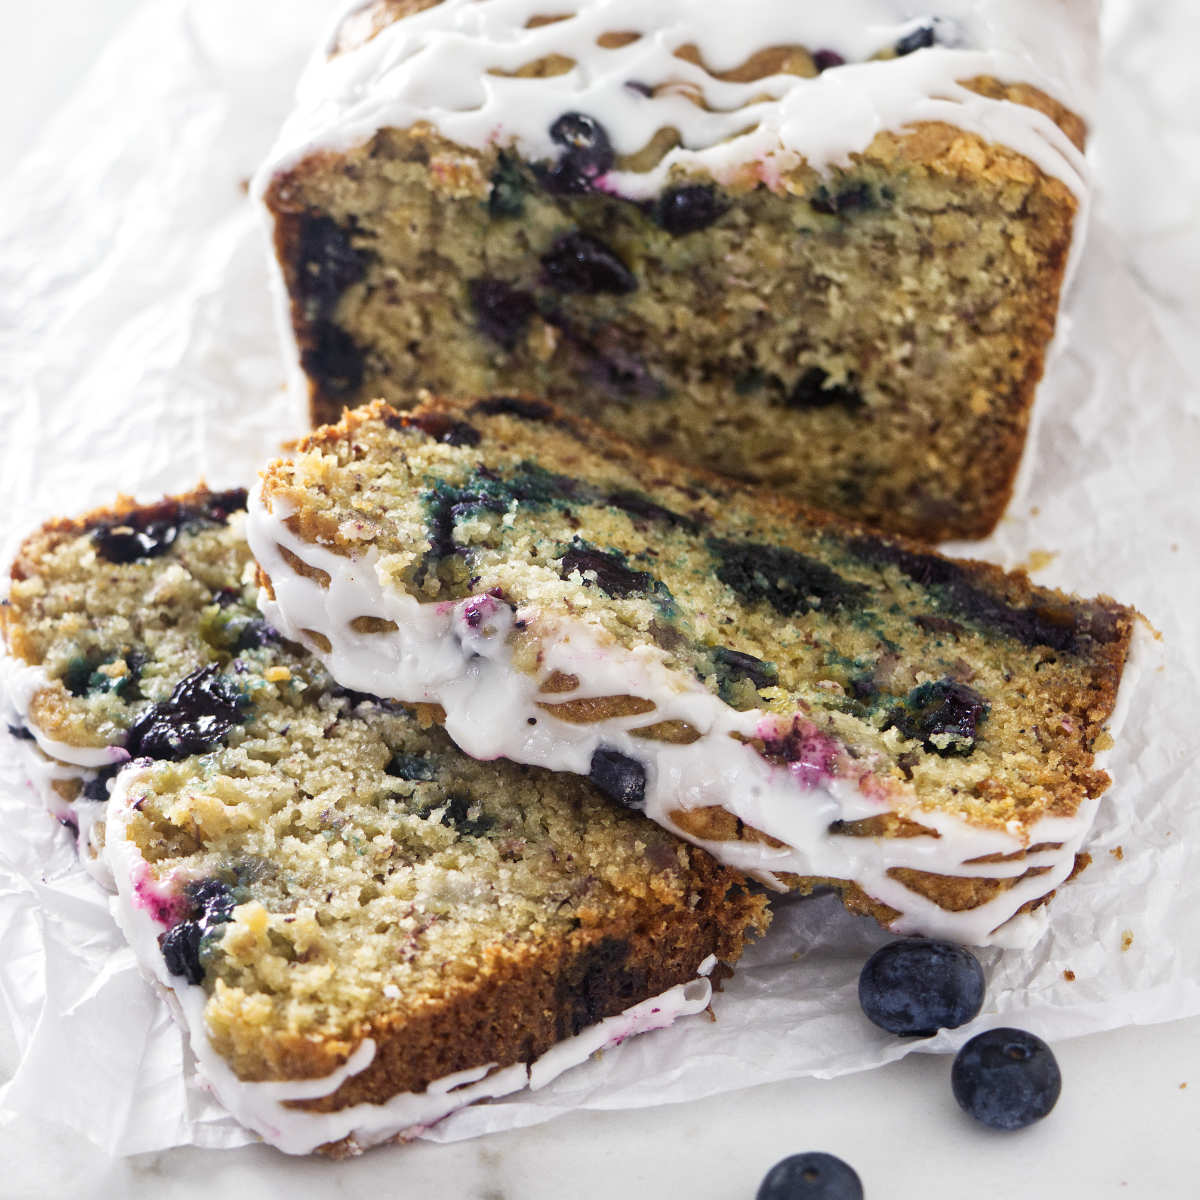 Slices of banana bread with blueberries on white parchment paper.